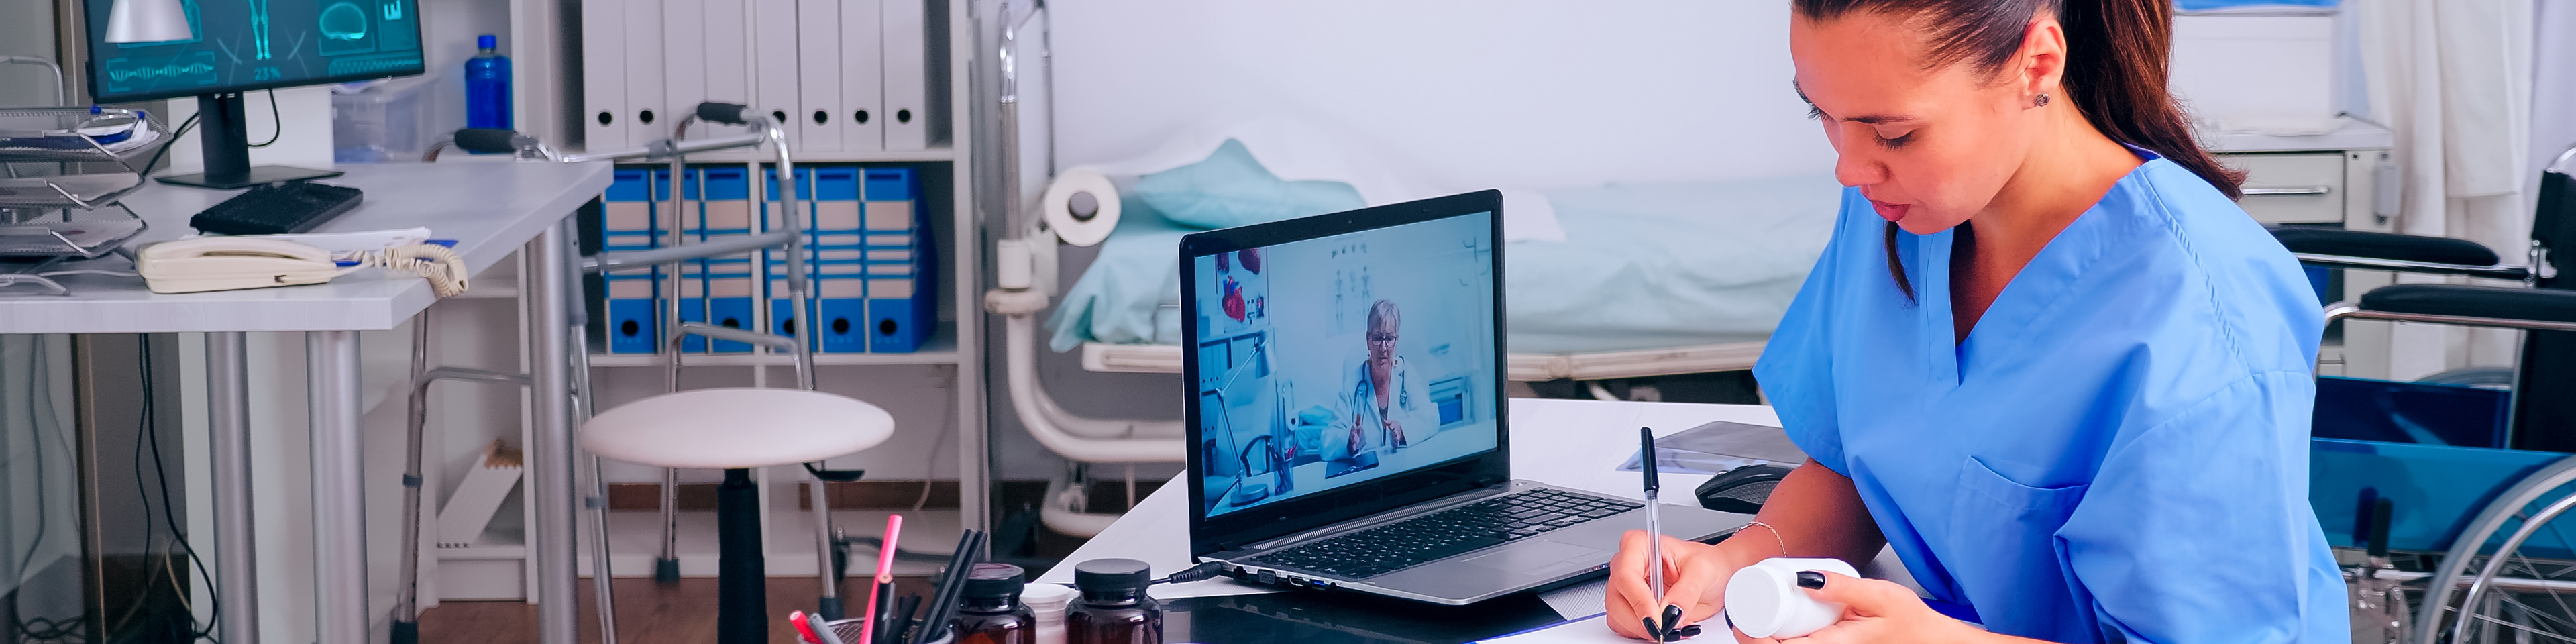 Nurse taking notes, listening to remote doctor during video call